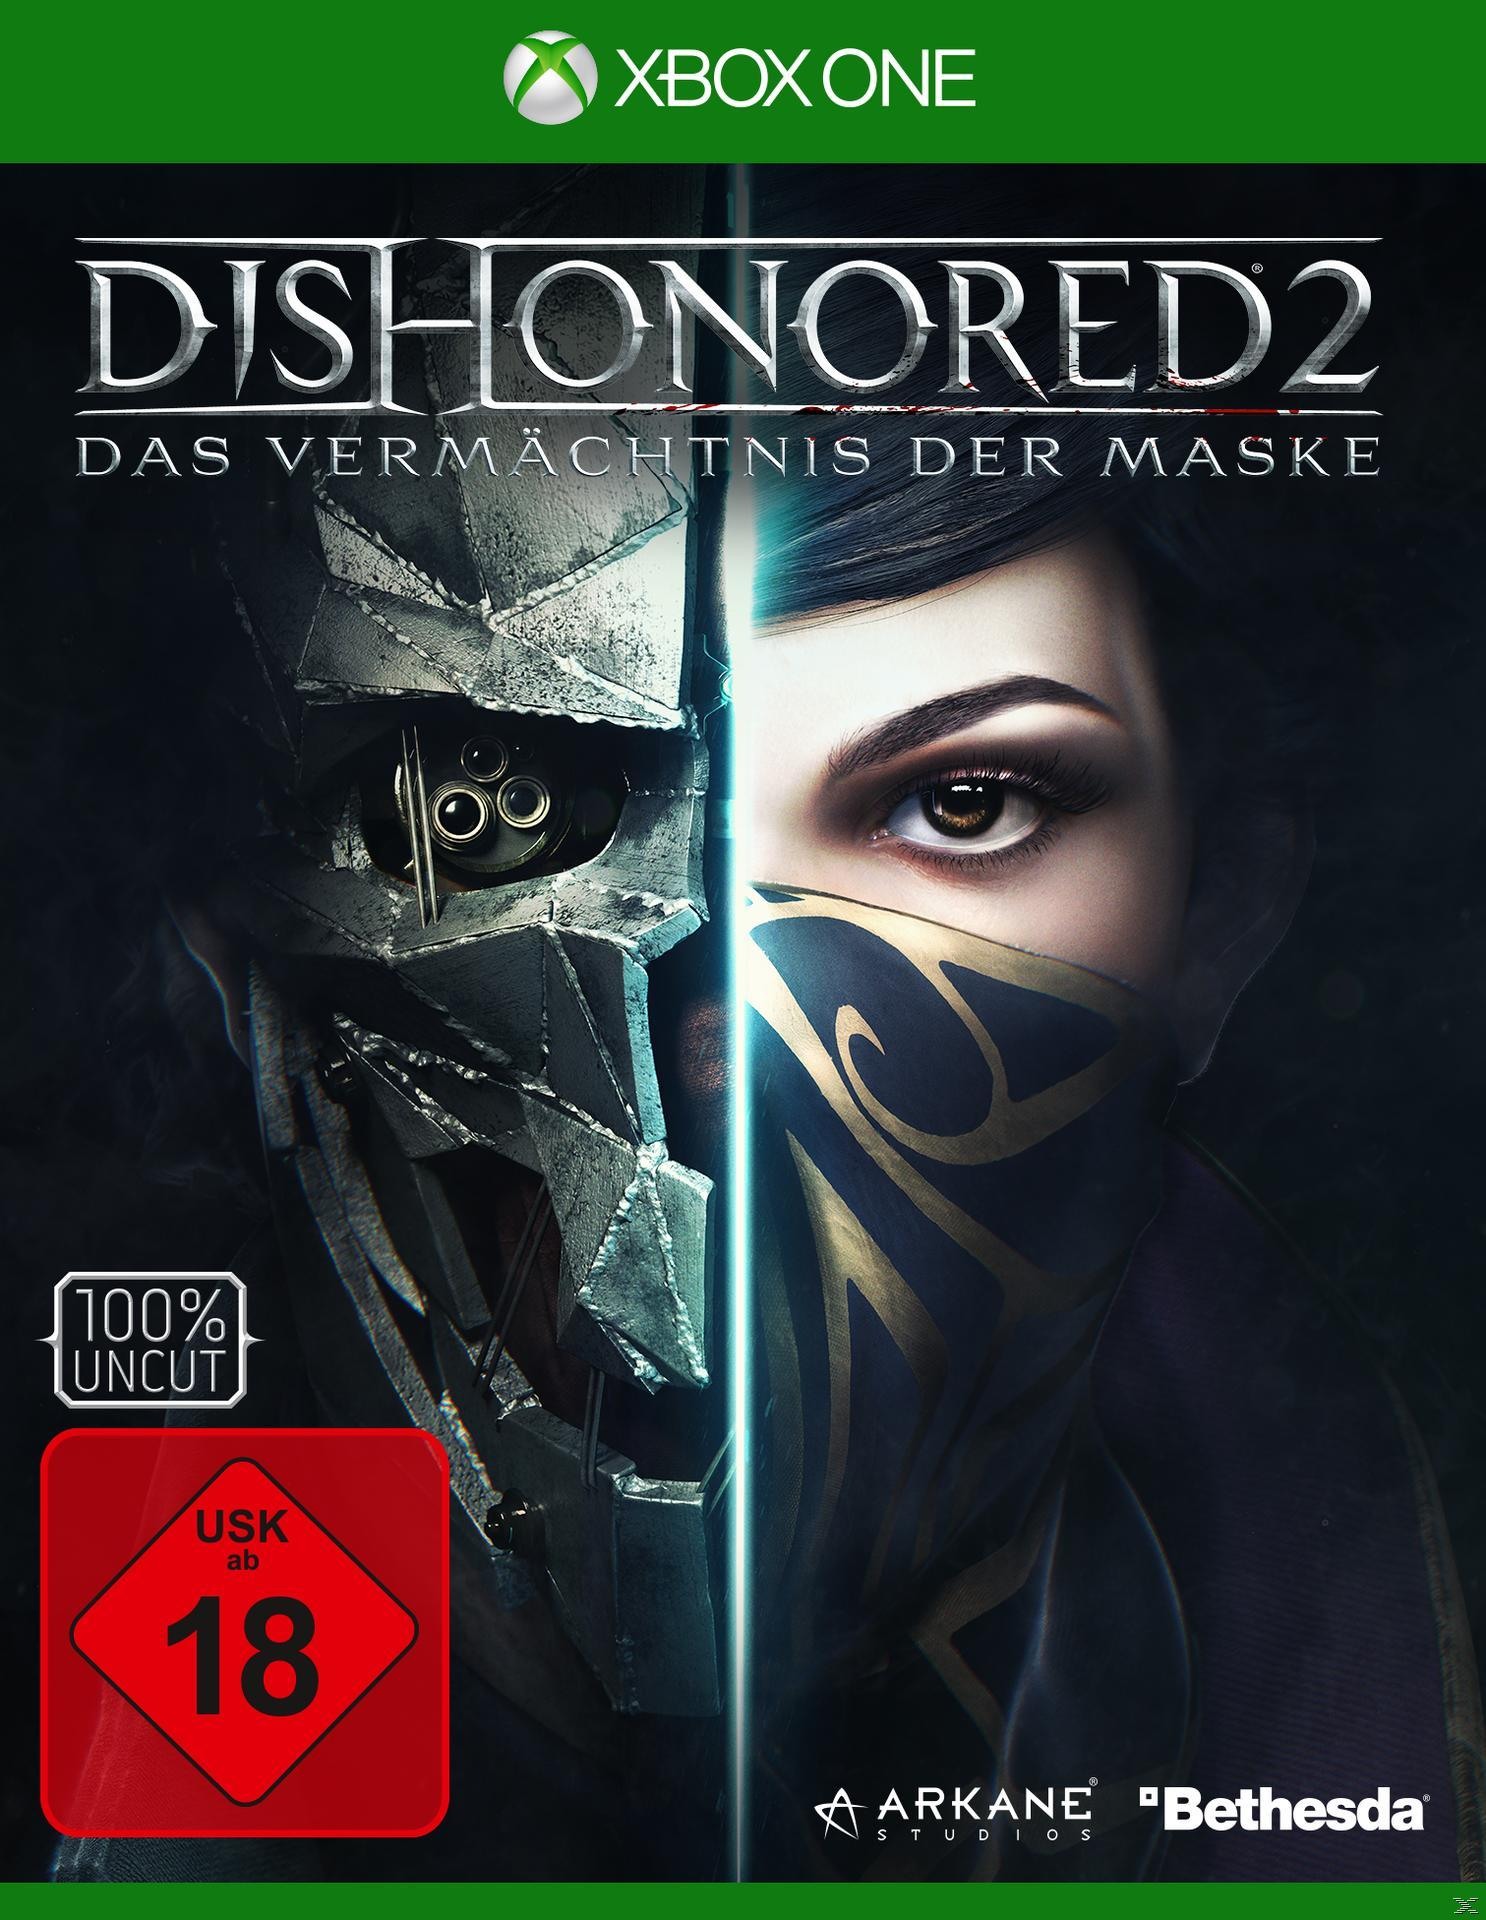 Day Edition 1 2 One] [Xbox - Dishonored -